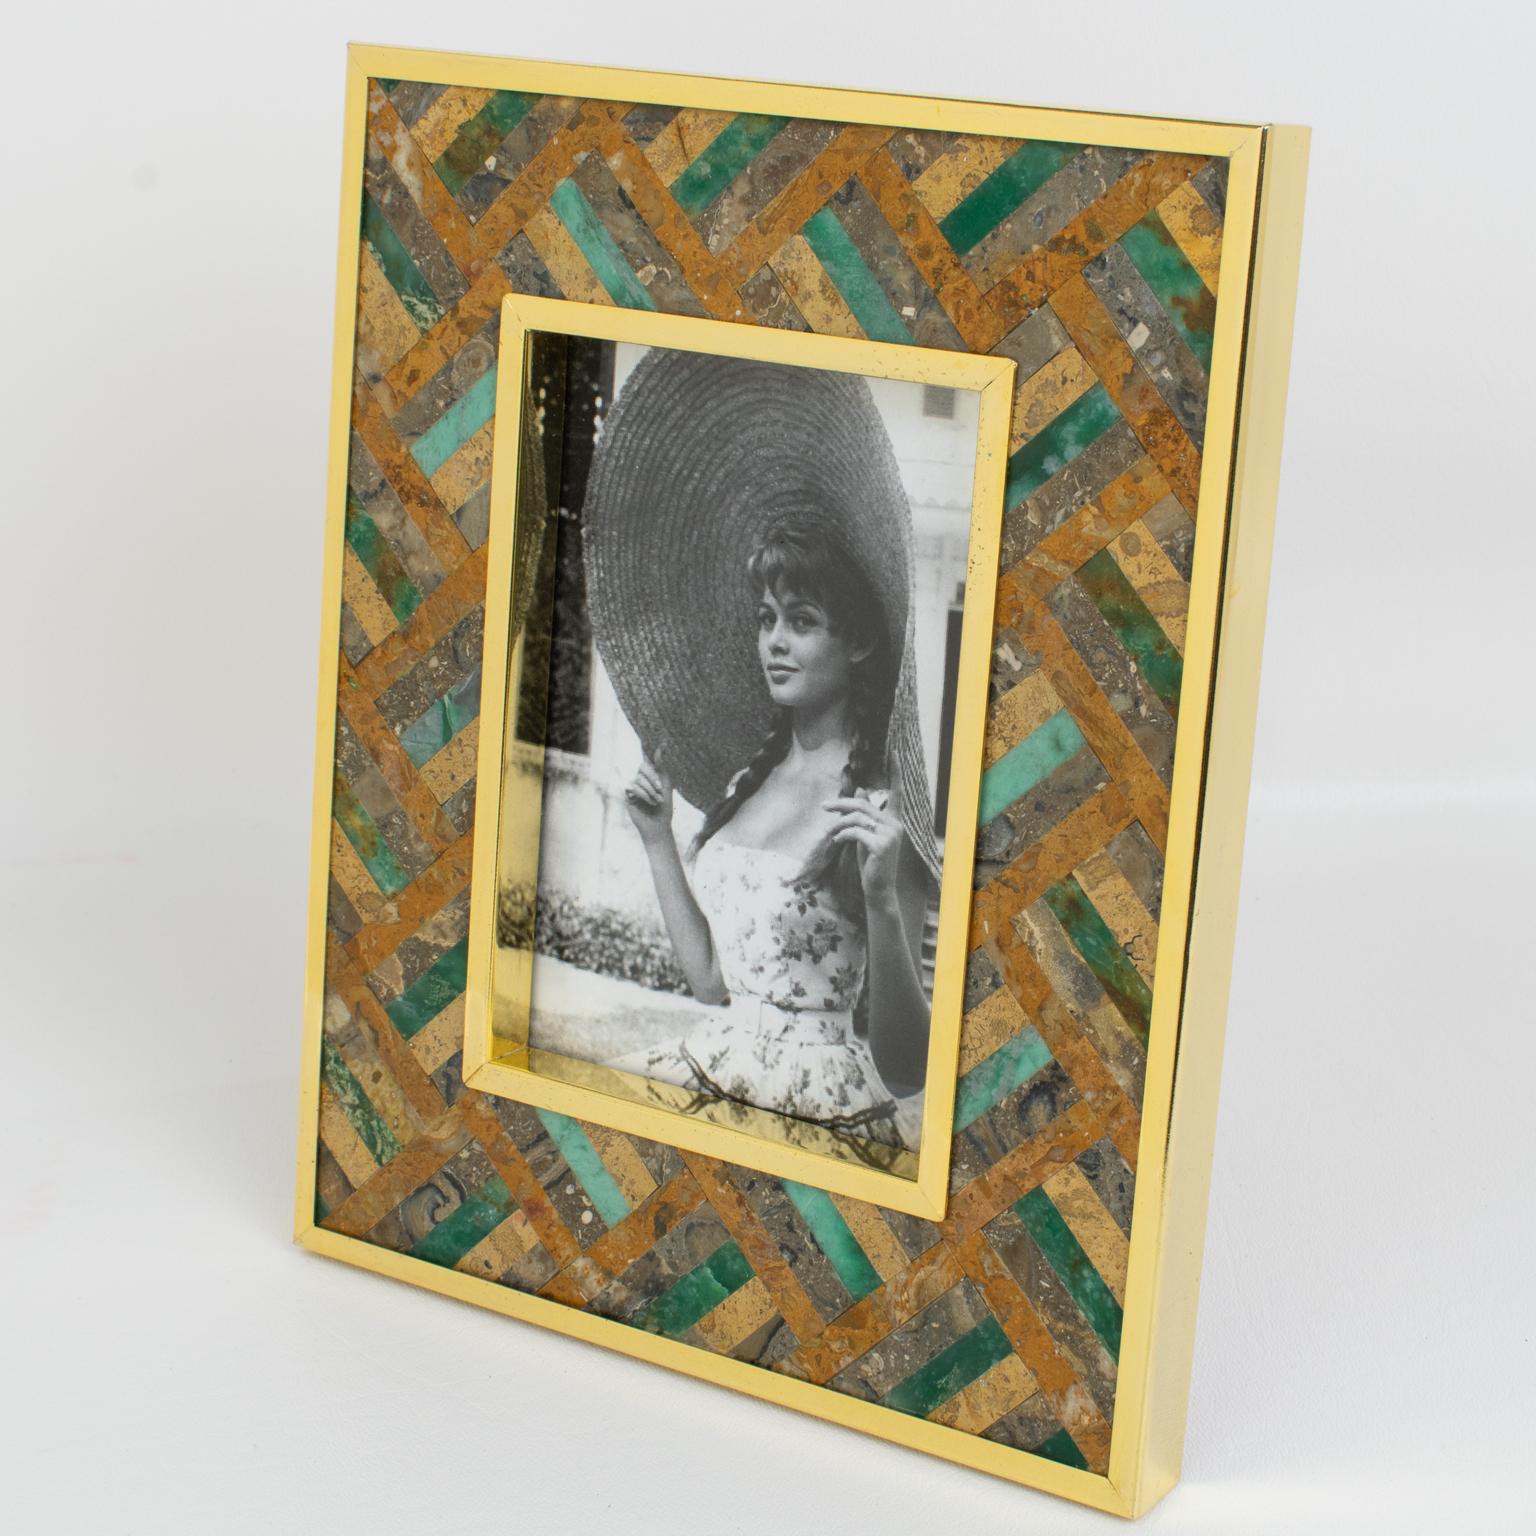 A lovely gilded brass and stone picture photo frame designed by Italian designer Rita Frascione, Firenze, in the 1980s. 
The photo frame features a gilded metal framing with stone marquetry inlaid. The hard gemstones used are crystalline rocks like